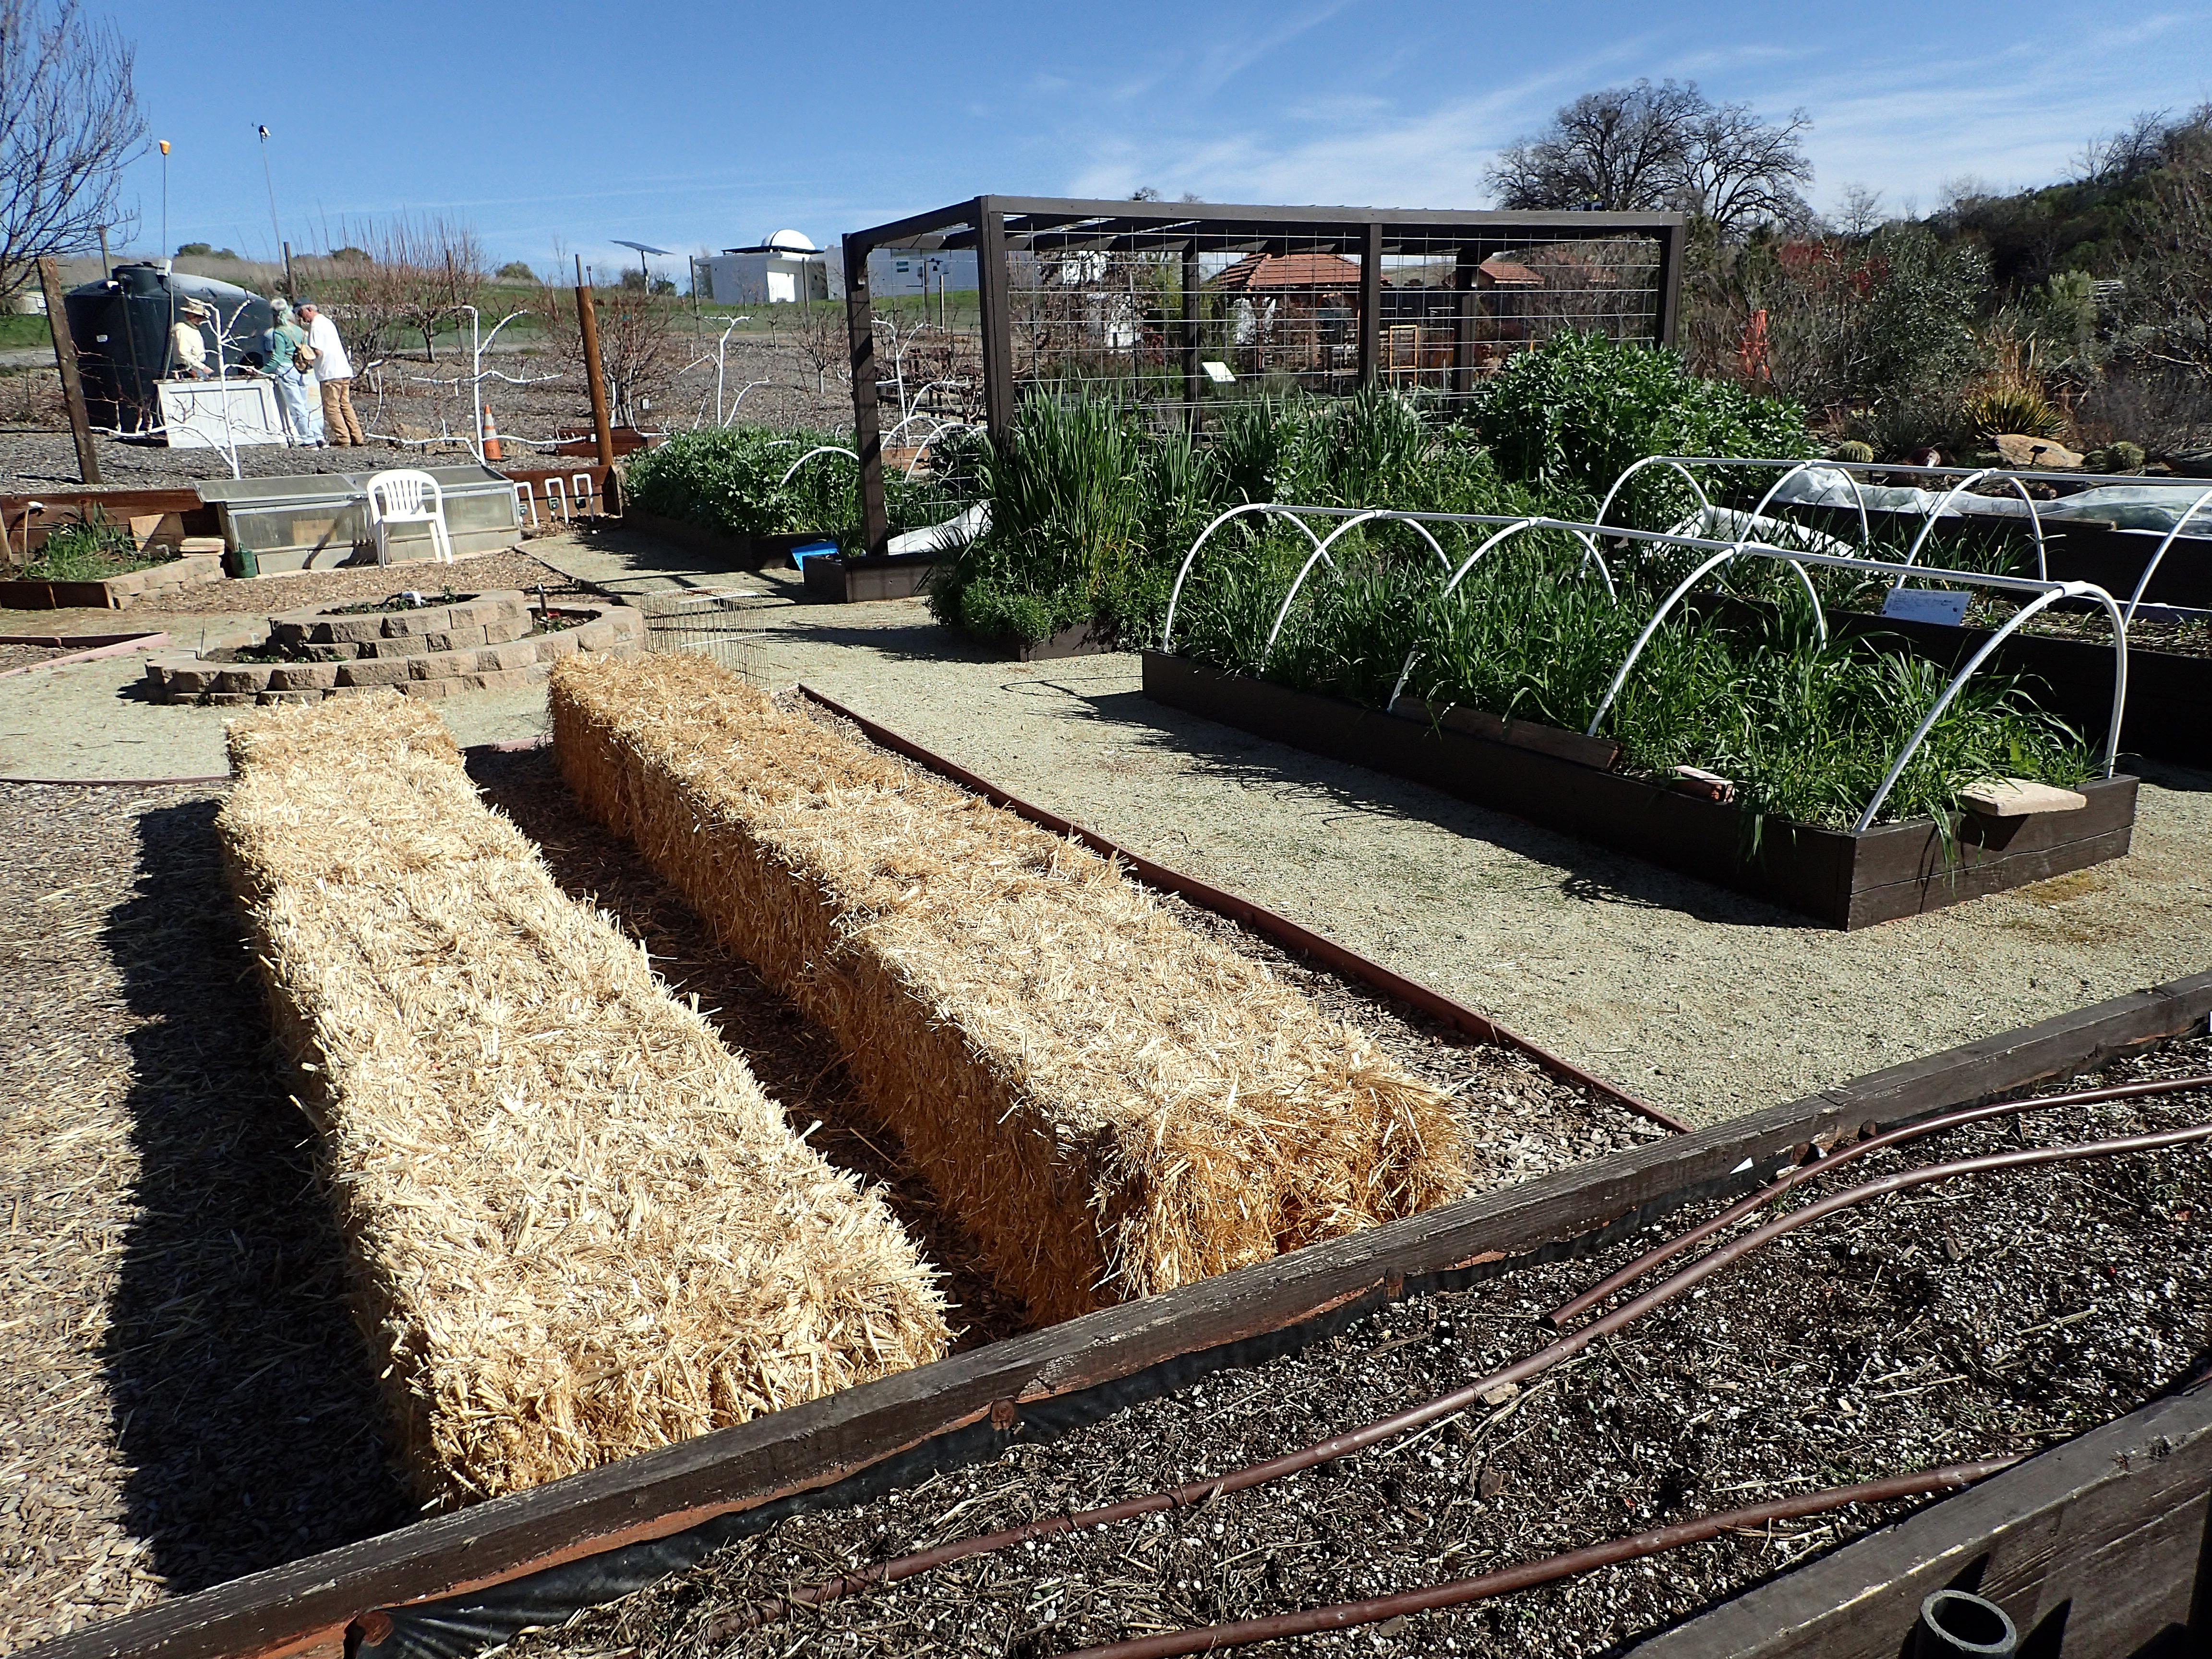 2-3-2018, Straw bales delivered and placed in the Vegetable Garden